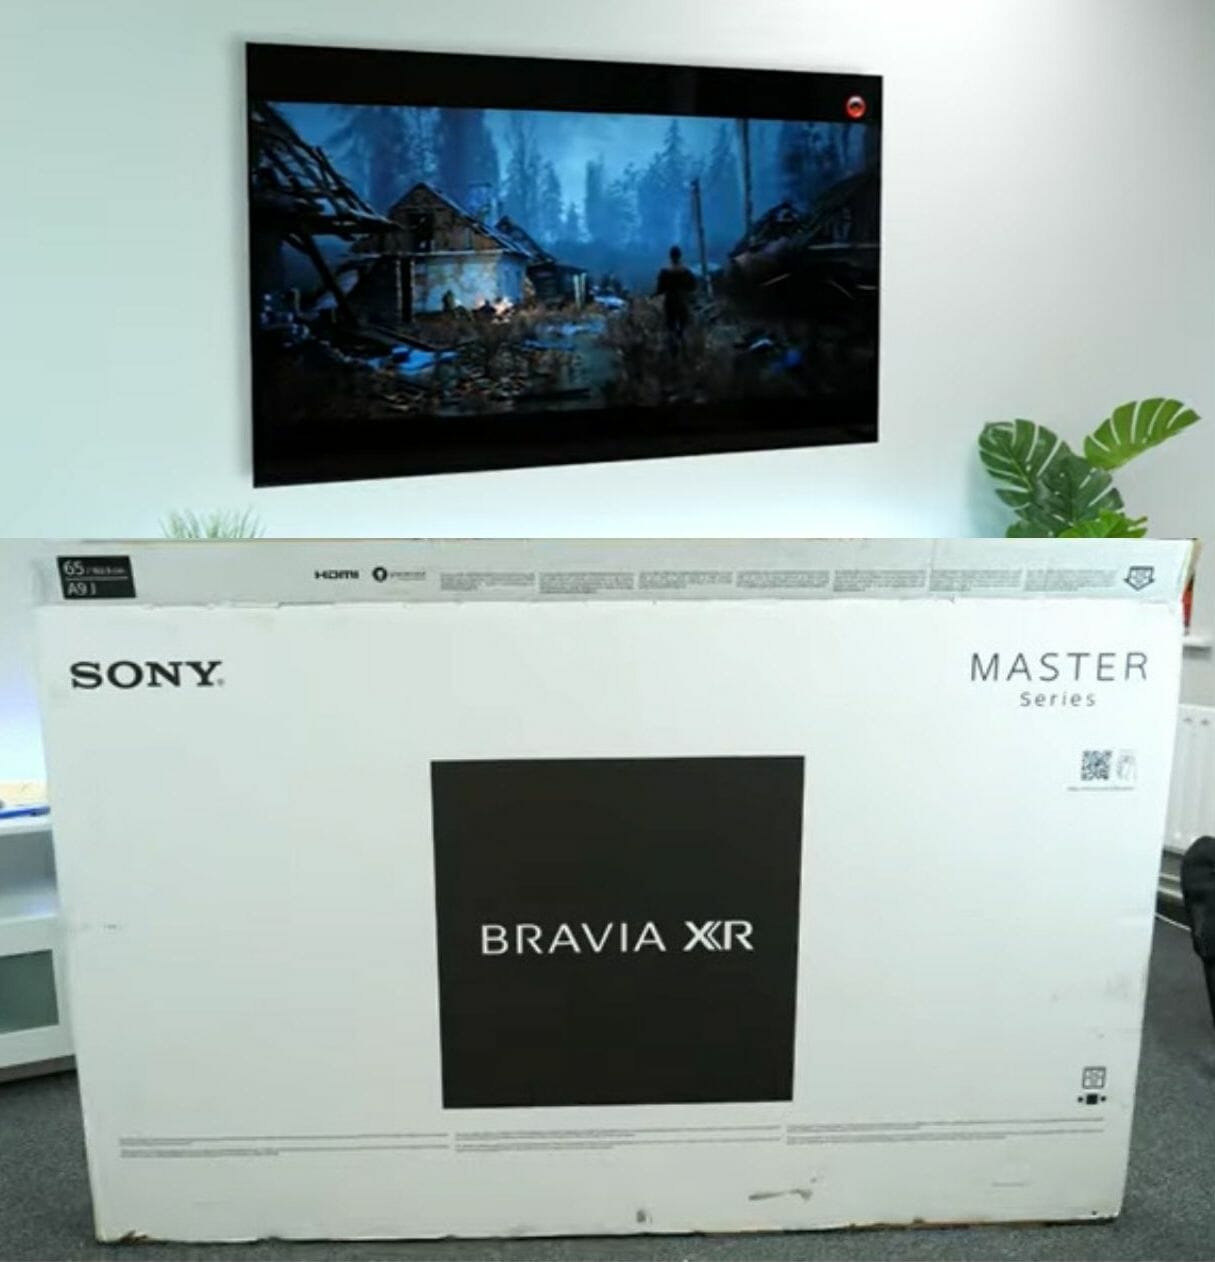 The box of Sony Bravia and TV on the wall